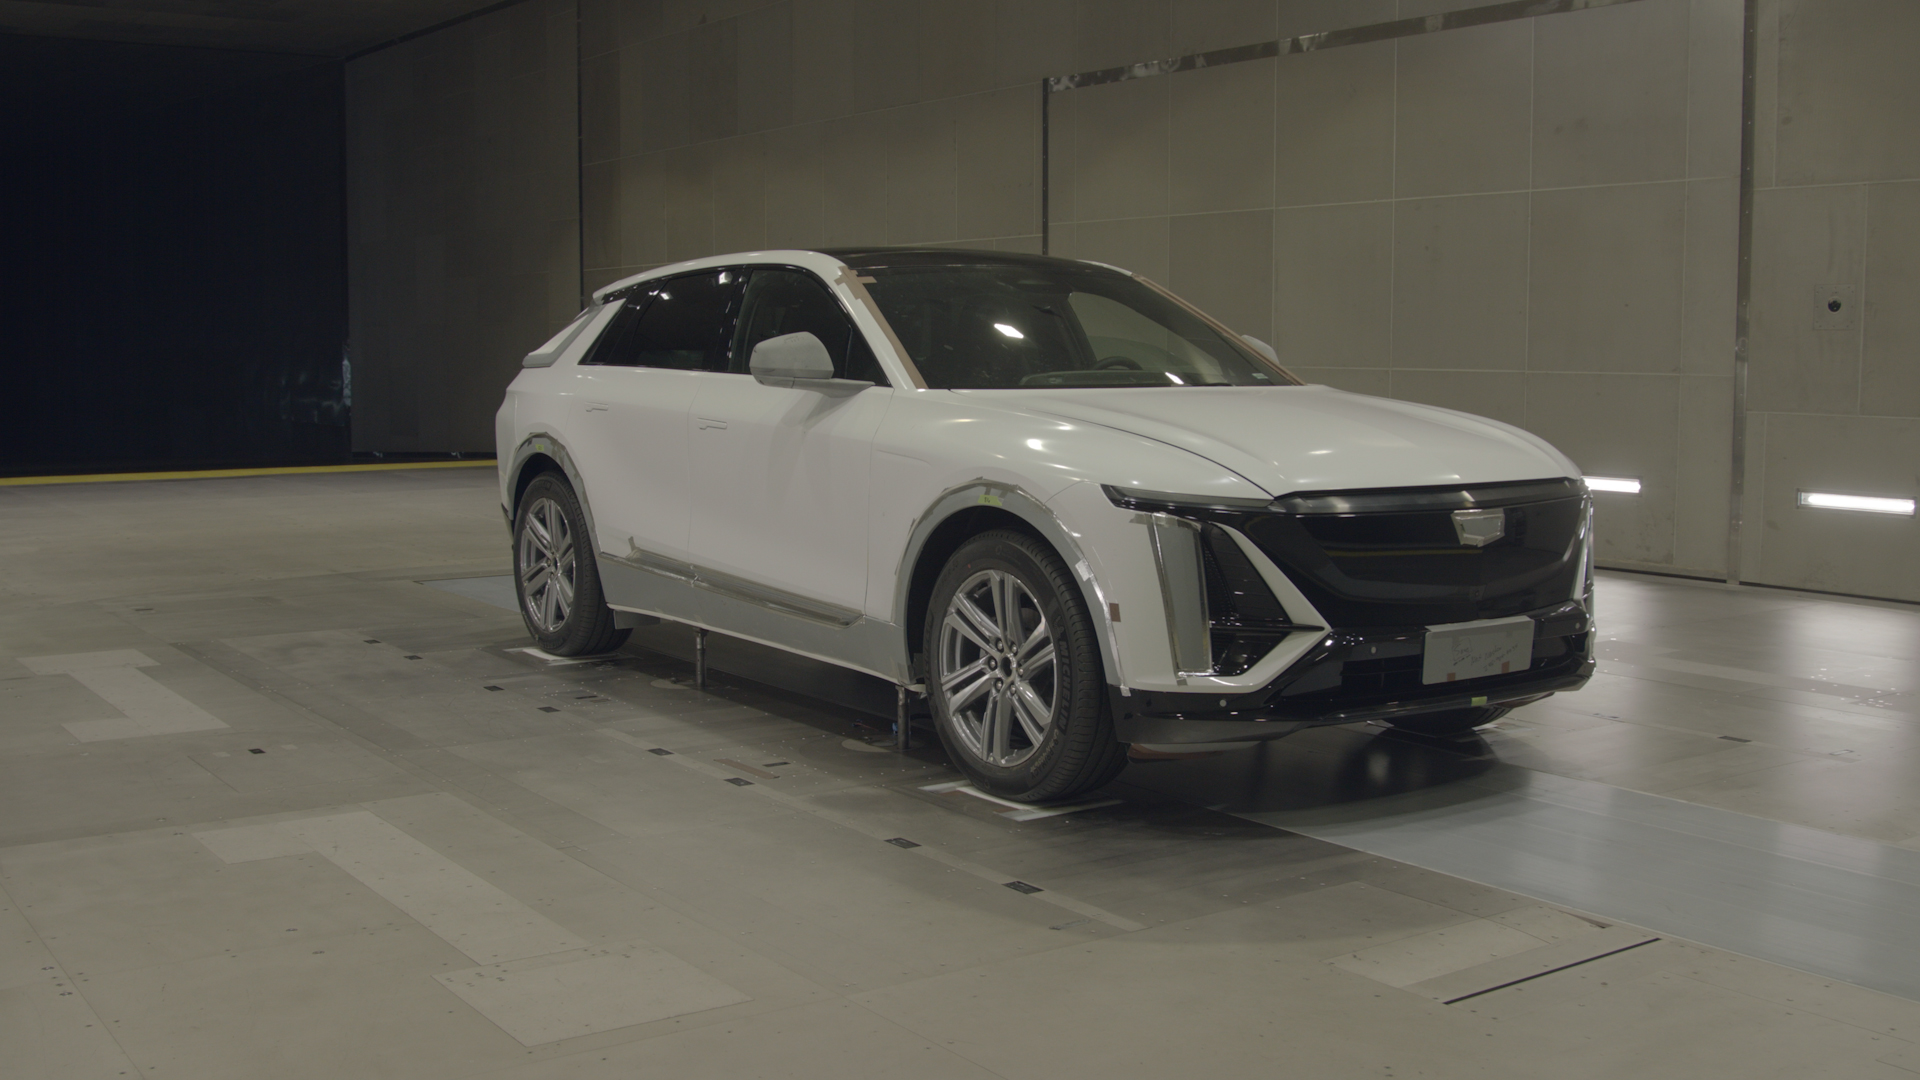 Testing of the all-new 2023 Cadillac Lyriq pre-production model. Actual production model will vary